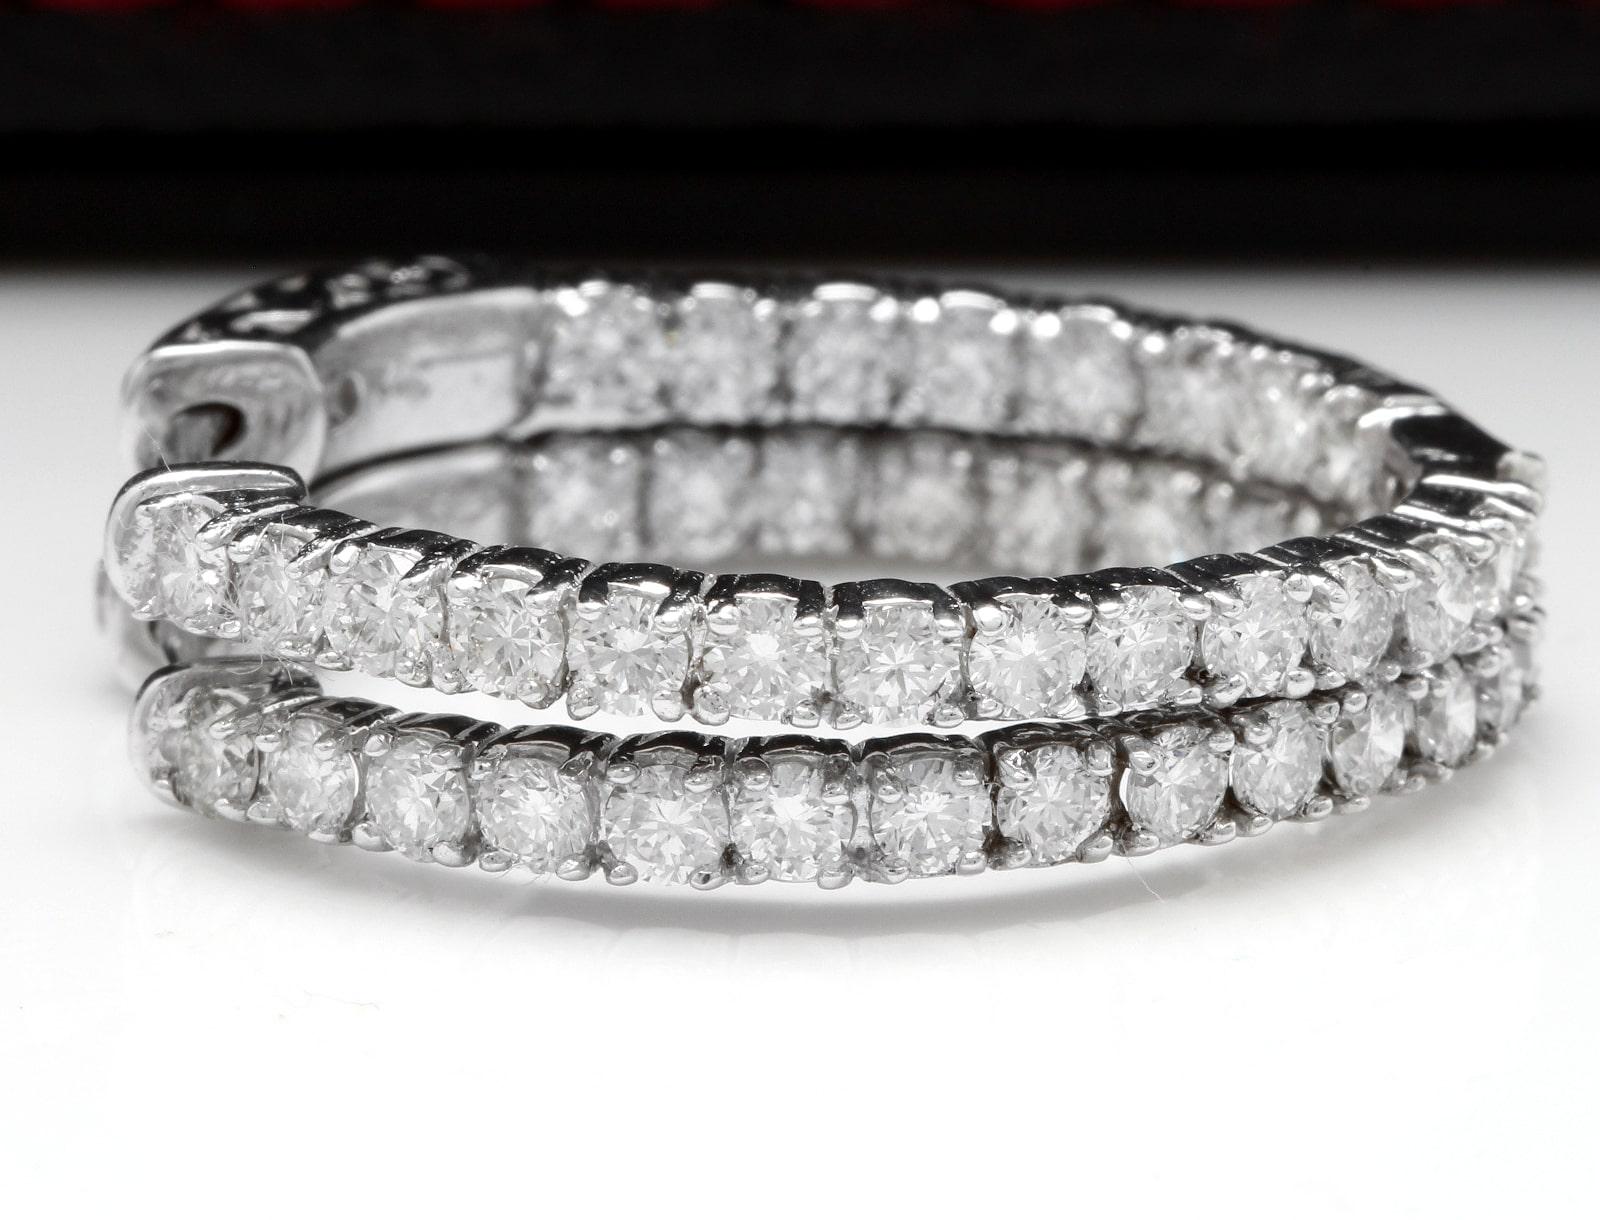 Exquisite 2.25 Carat Natural Diamond 14 Karat Solid White Gold Hoop Earrings For Sale 1